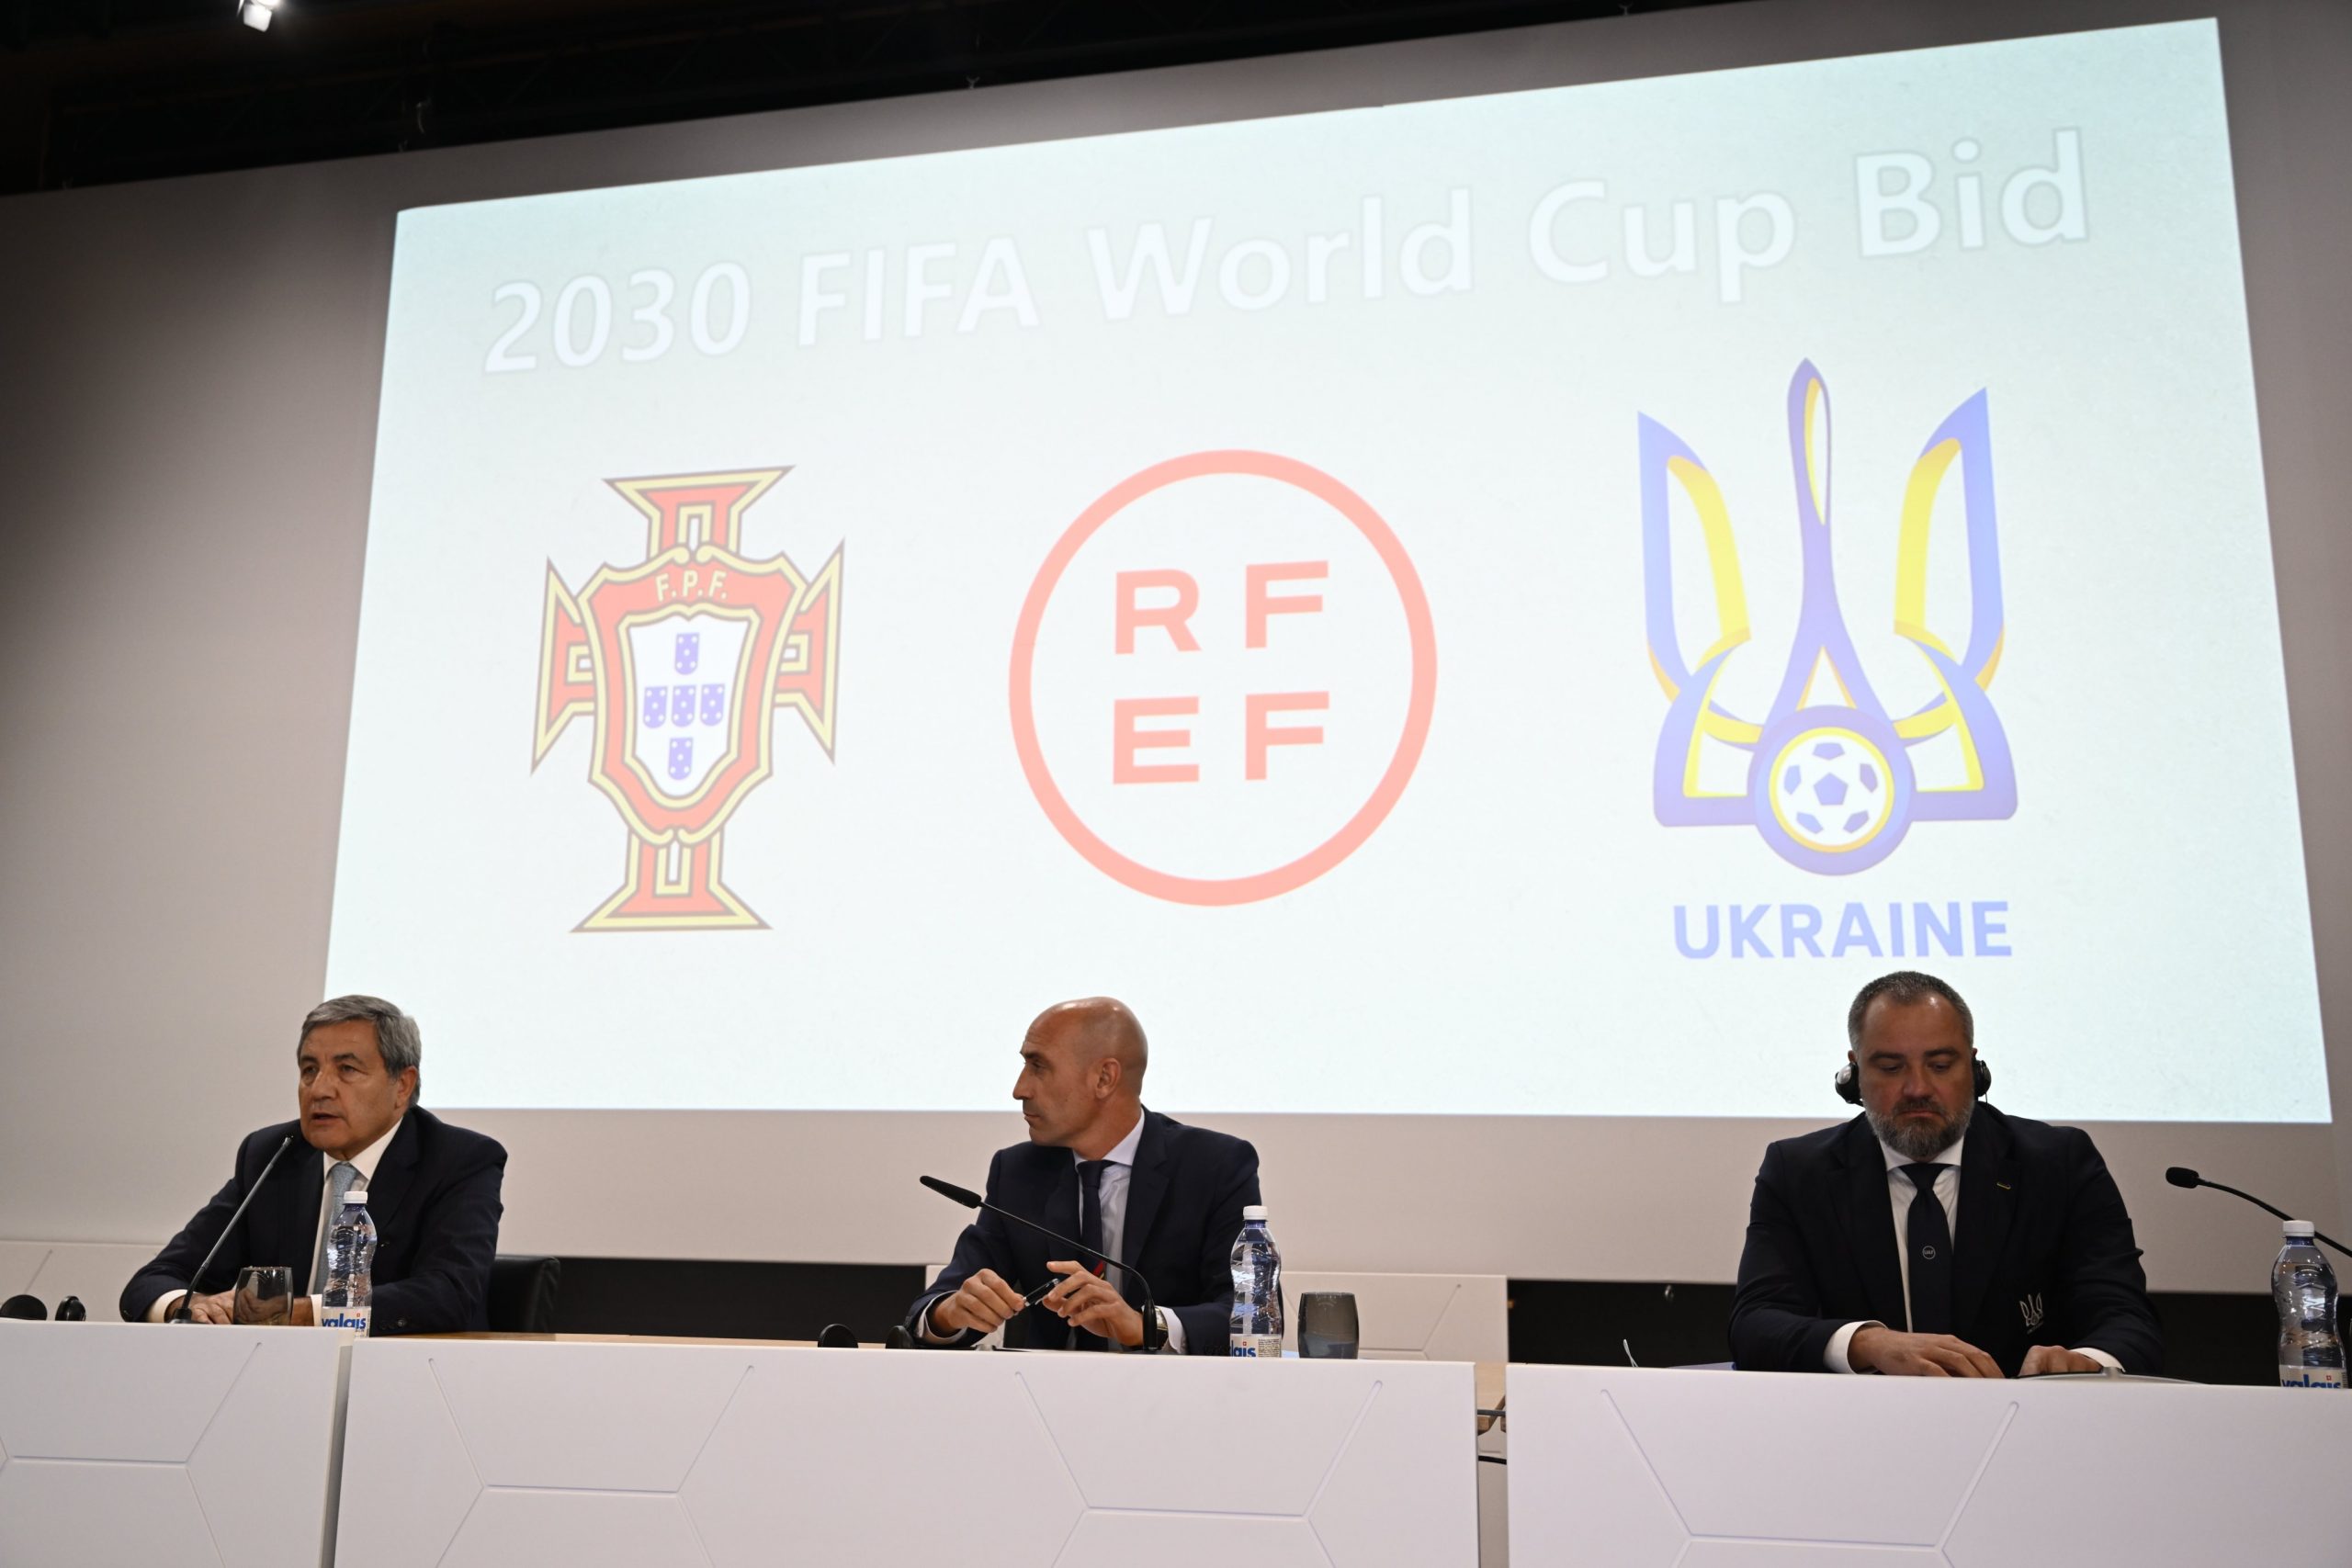 Spain And Portugal Welcome Ukraine In Joint Bid To Host Football's World Cup In 2030